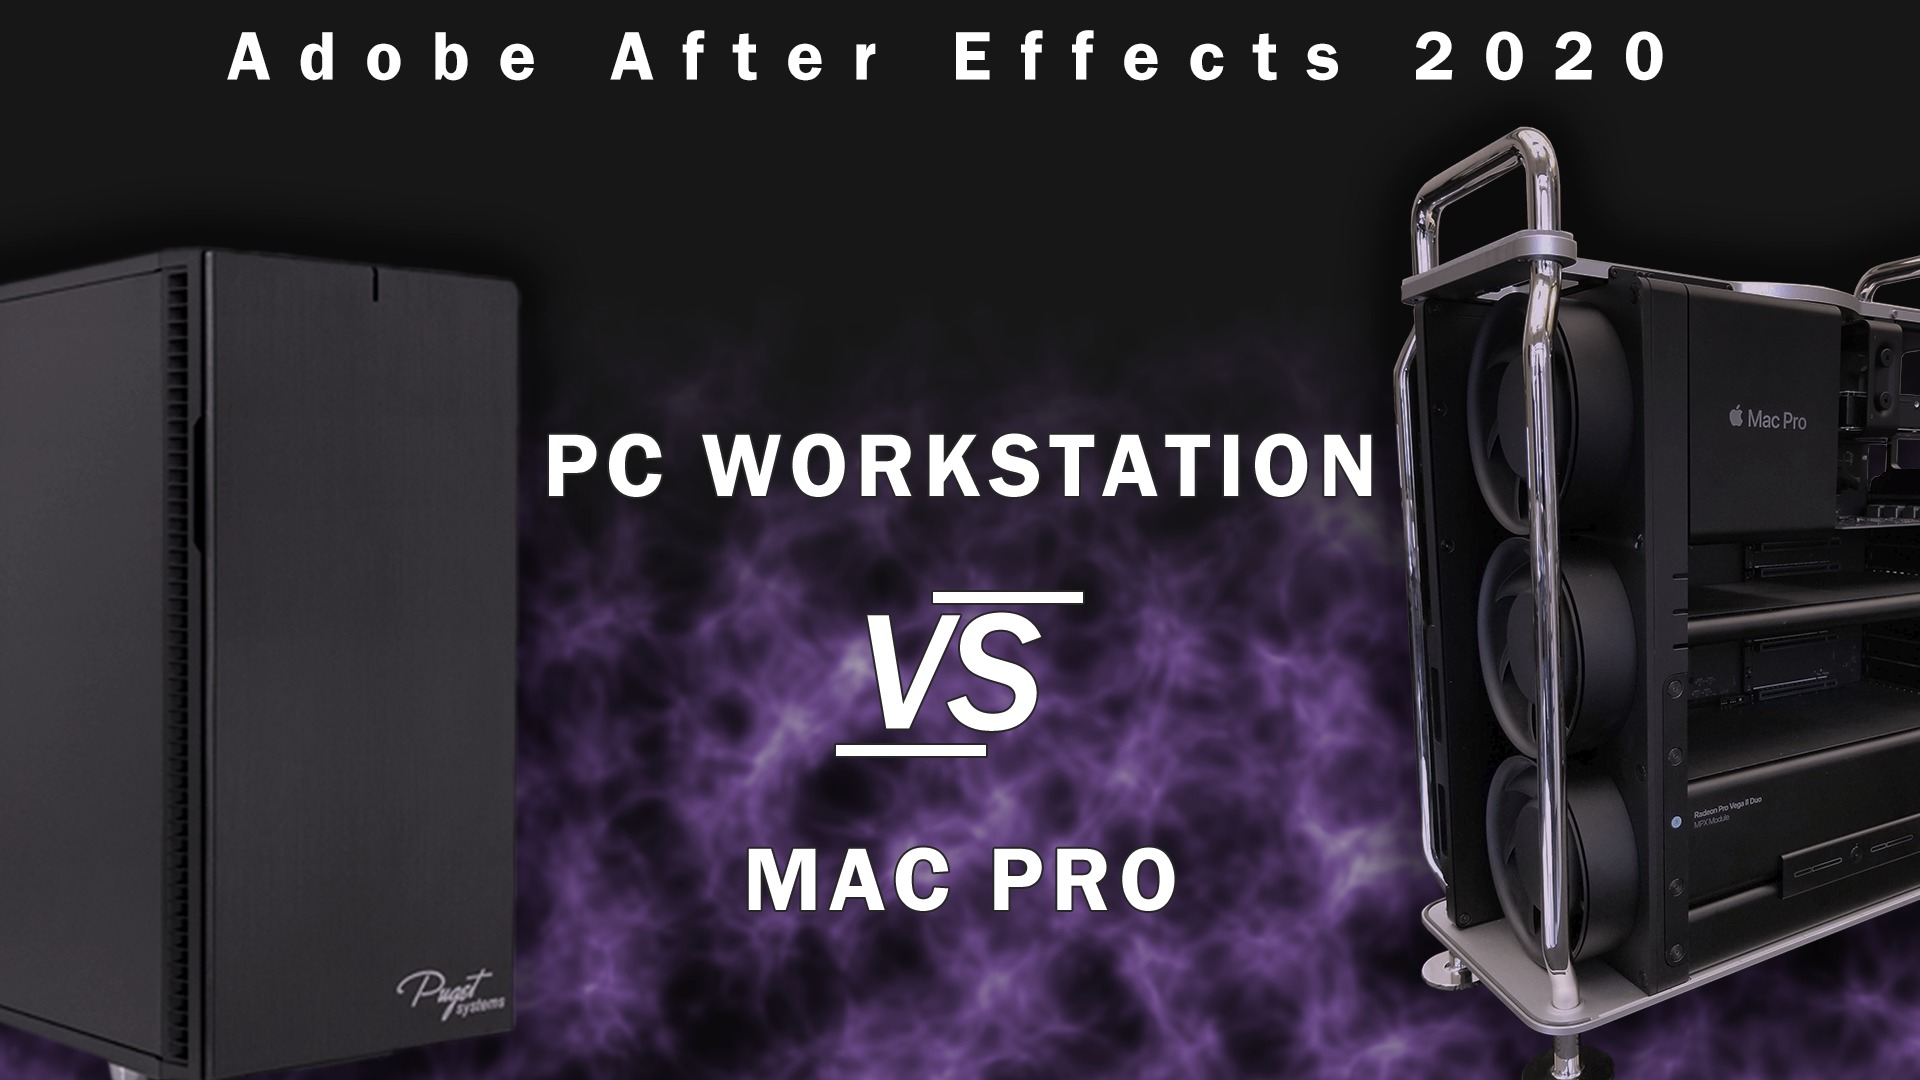 Mac Pro vs PC workstation for Adobe After Effects